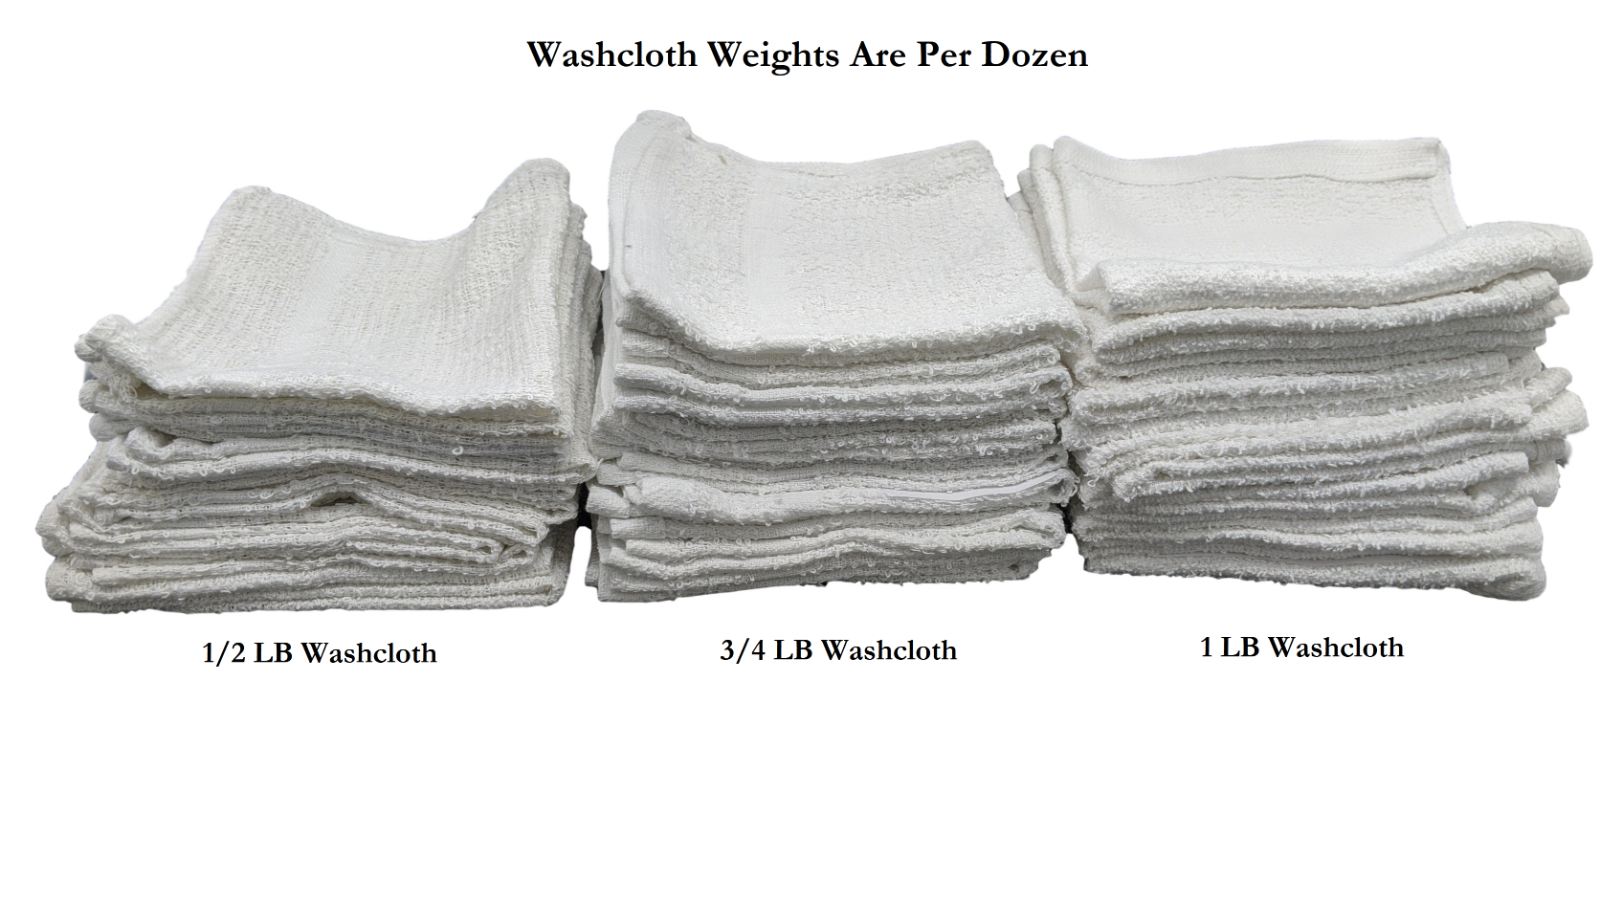 720 Pack - 12 Inch x 12 Inch White Cotton Value Rags - Reusable Lt Weight Thin Cloth Rags - Wood Stain/Painting/Crafts/Garage - 3/4 Lb per Dozen - image 3 of 9